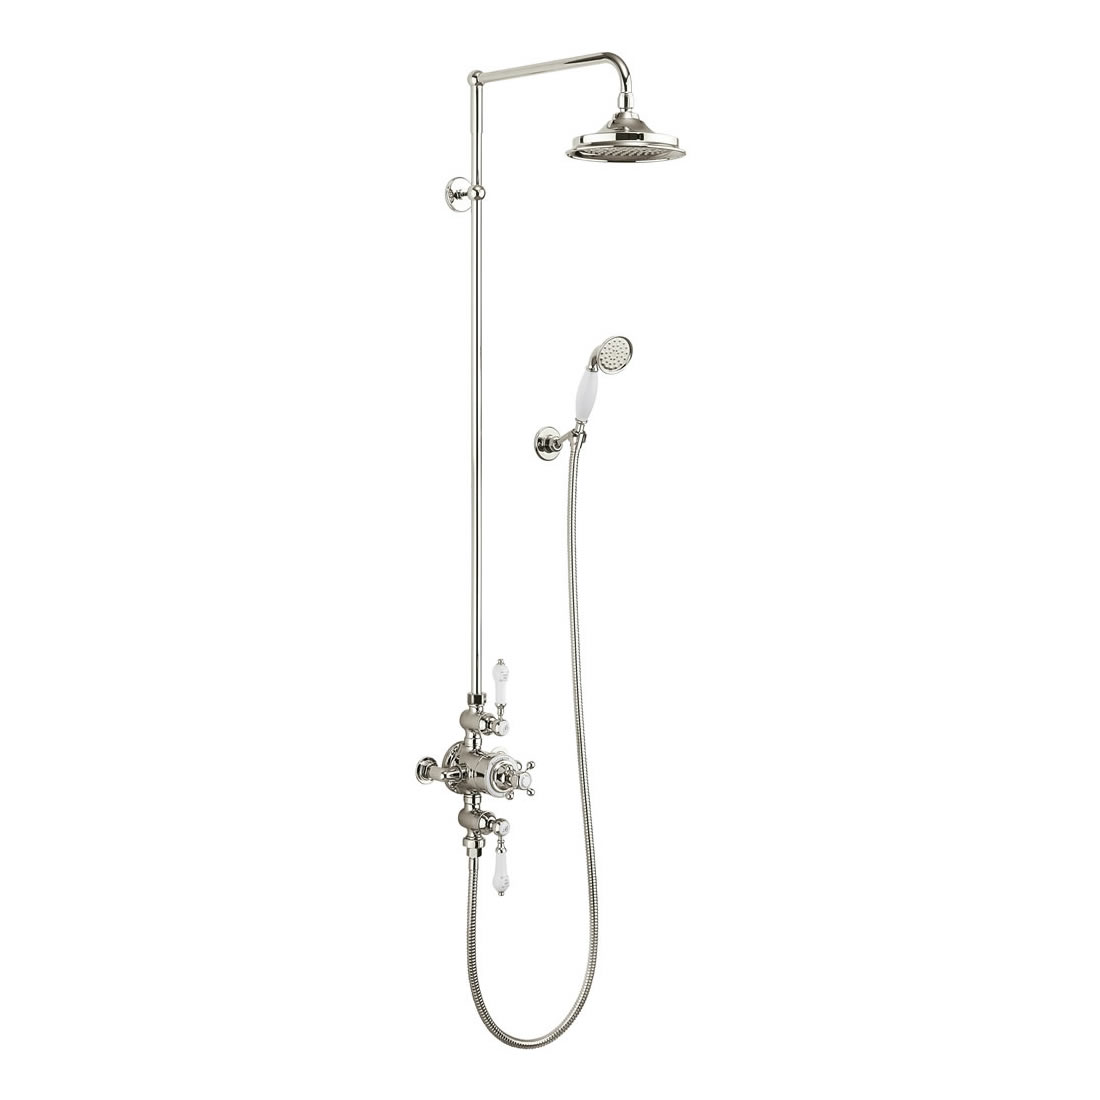 Avon Thermostatic Exposed Shower Valve Two Outlet,Rigid Riser, Swivel Shower Arm, Handset & Holder with Hose with 12 inch rose   - NICKEL